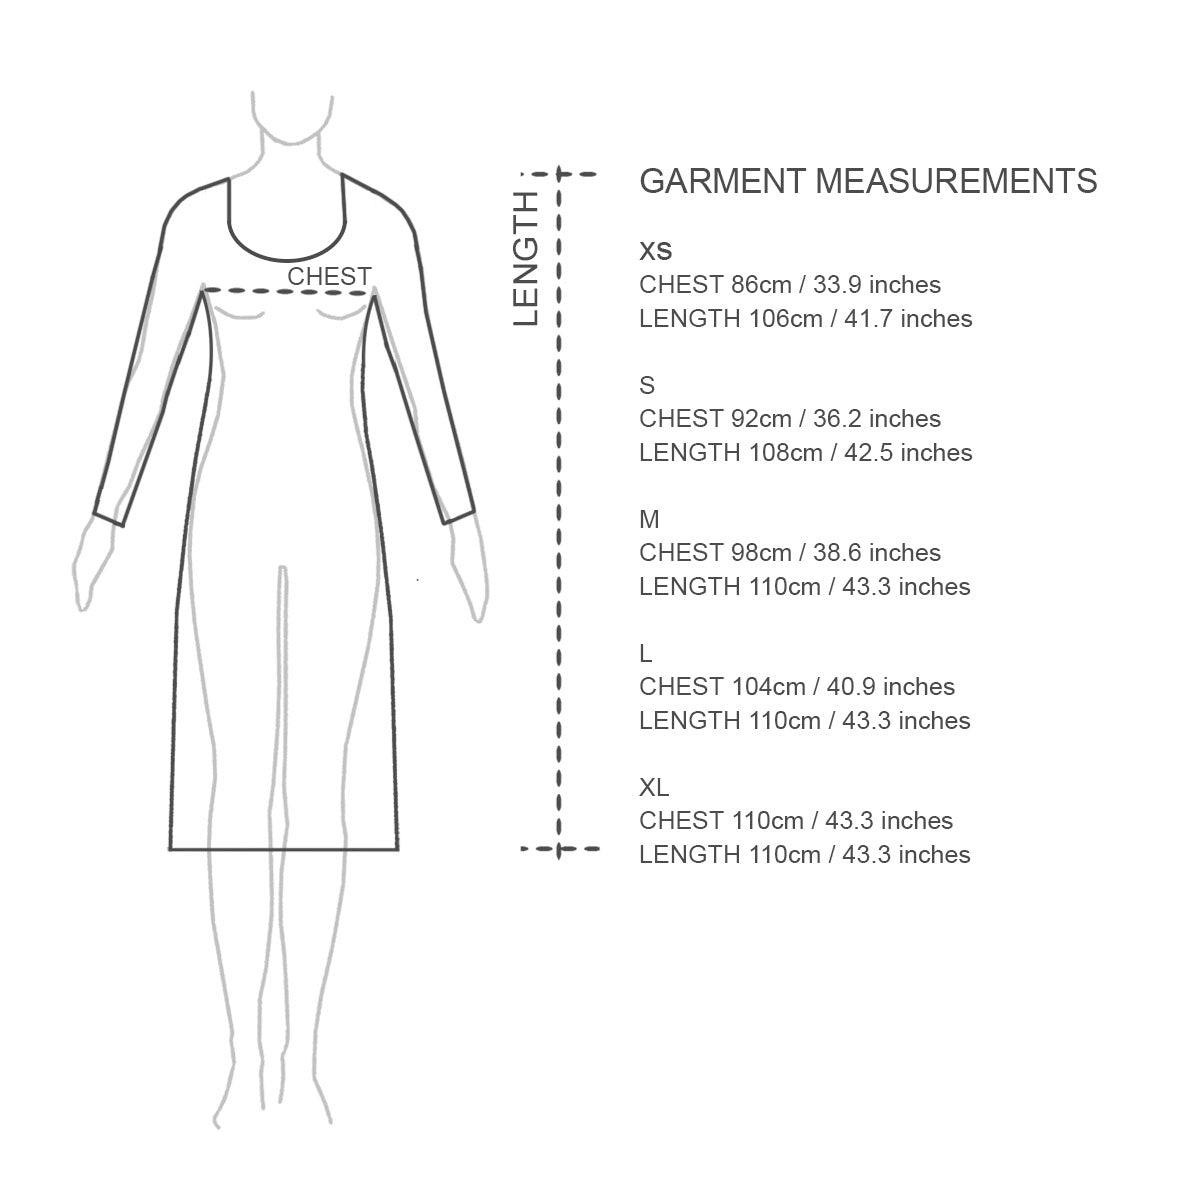 Sizing chart for women's winter organic cotton nightgown. Australian made. Long sleeved light grey marle cotton nightie with mid calf length.